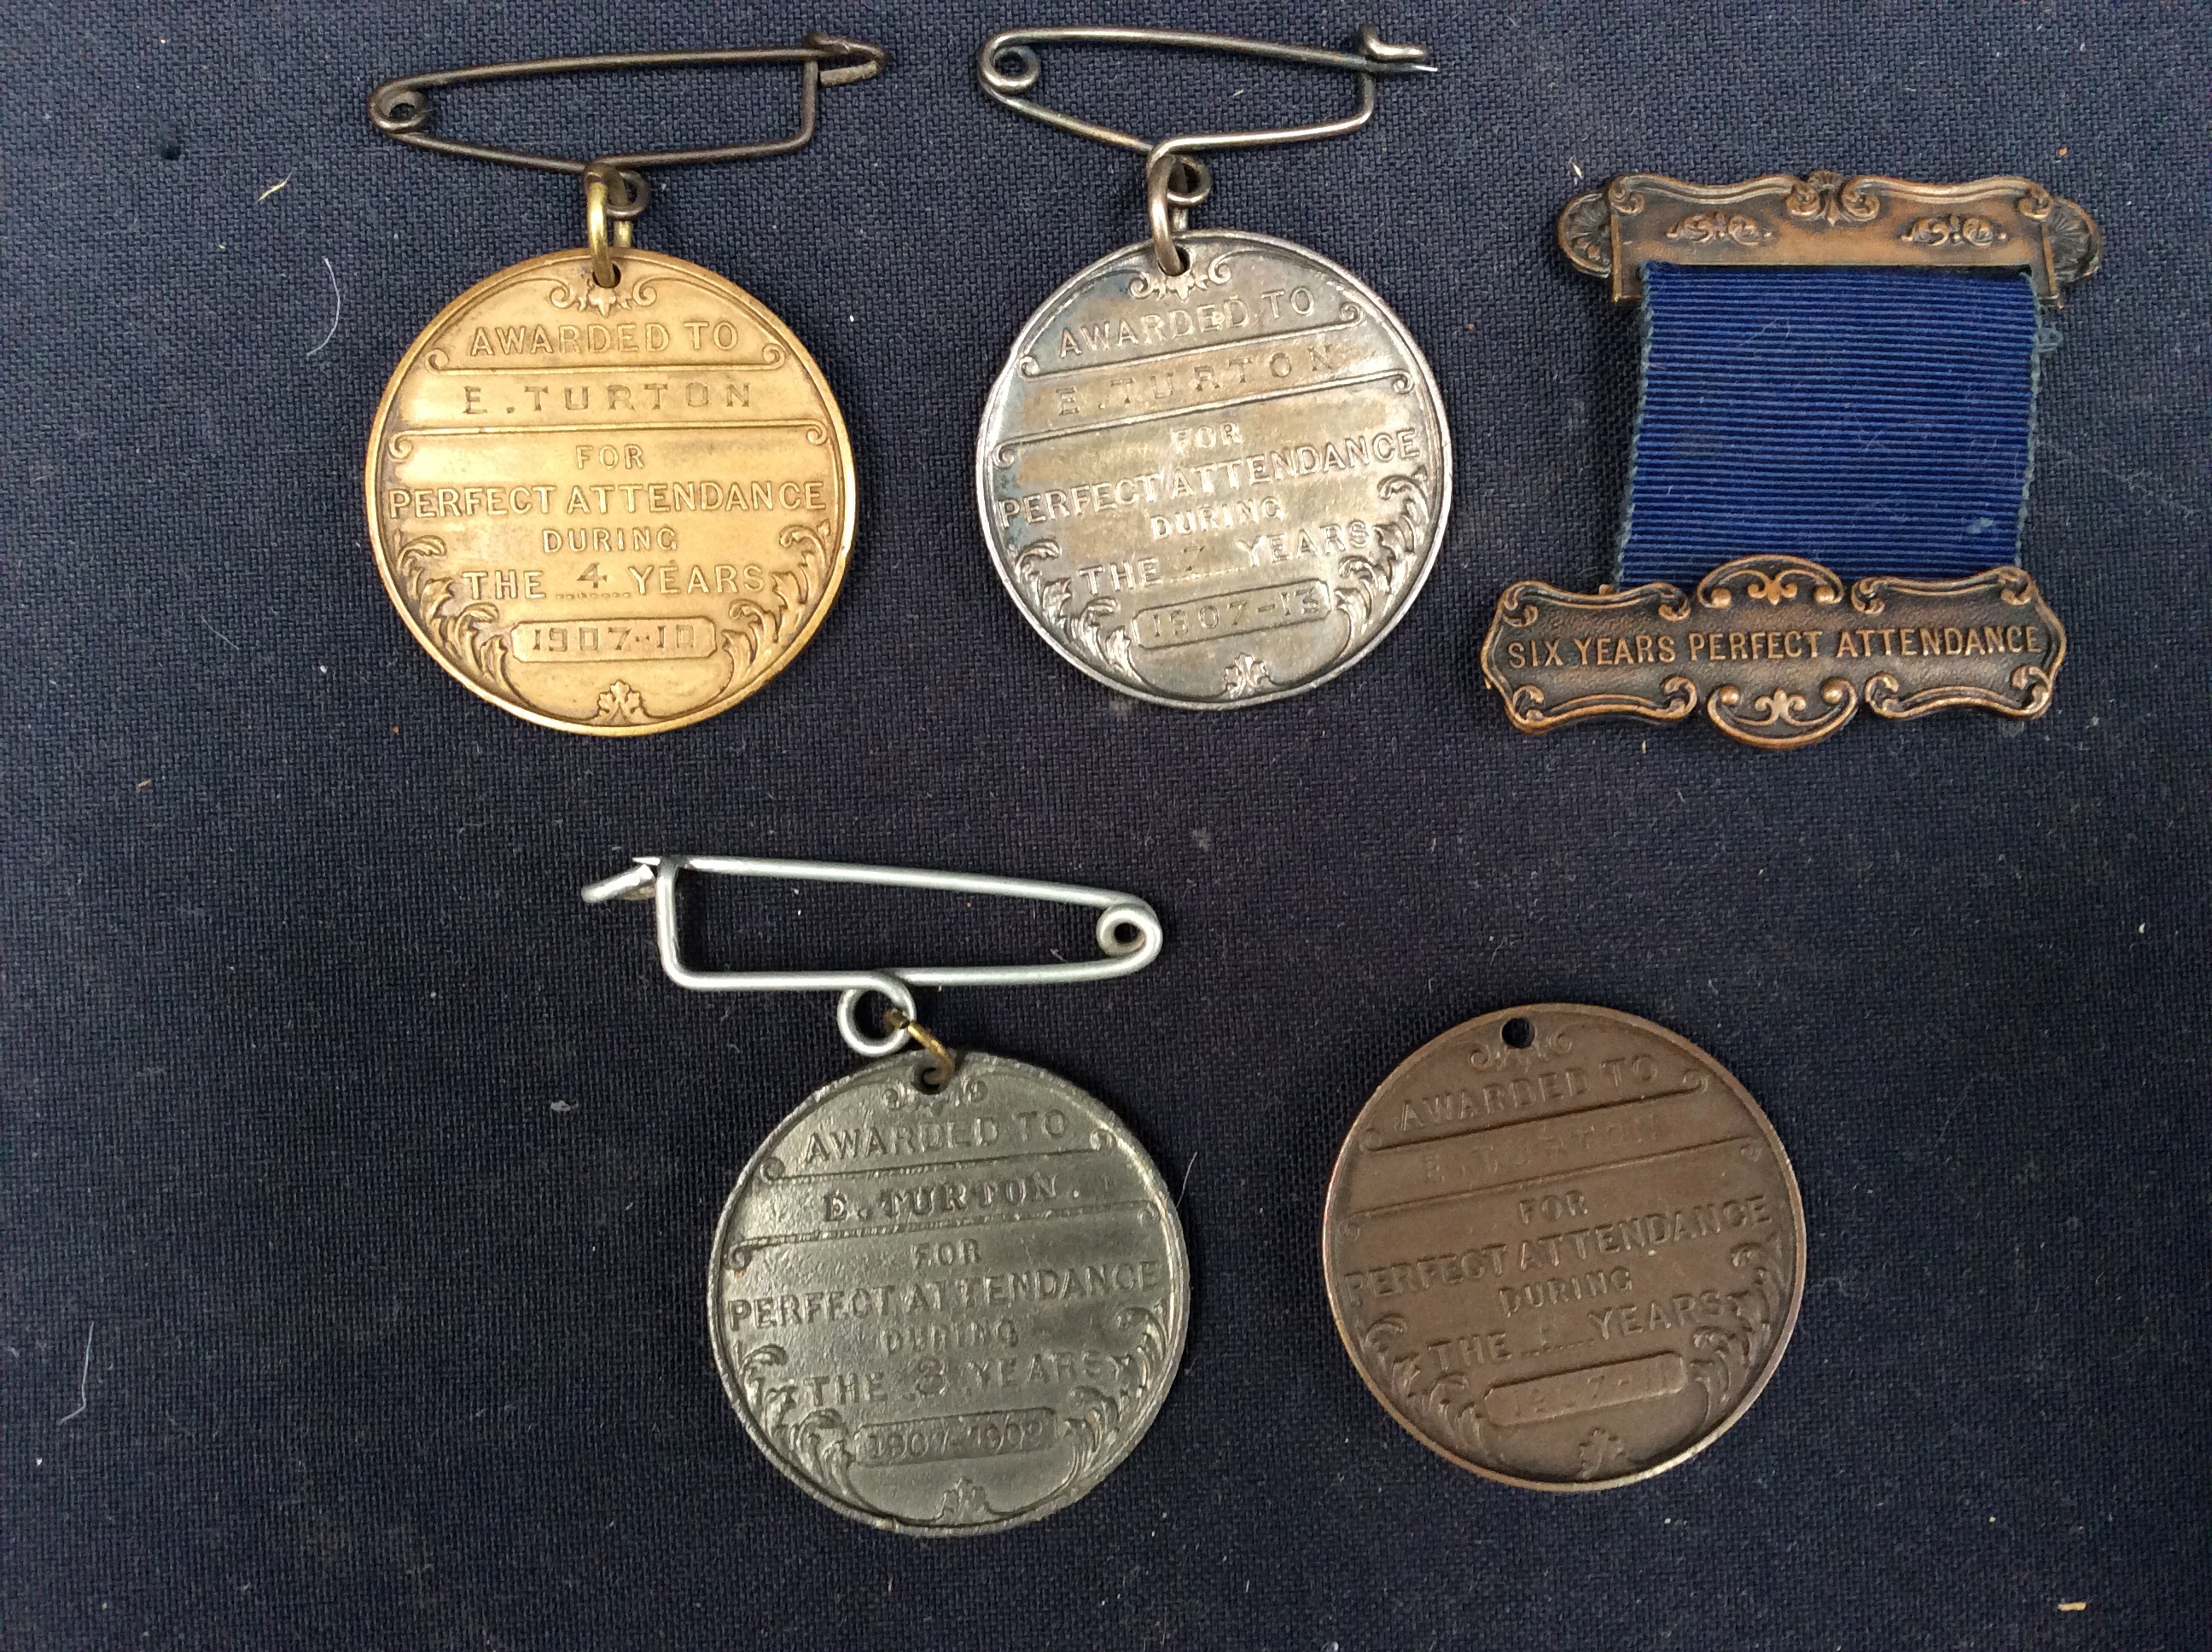 A small collection of four metal West Bromwich Education Committee medals, all awarded to E.